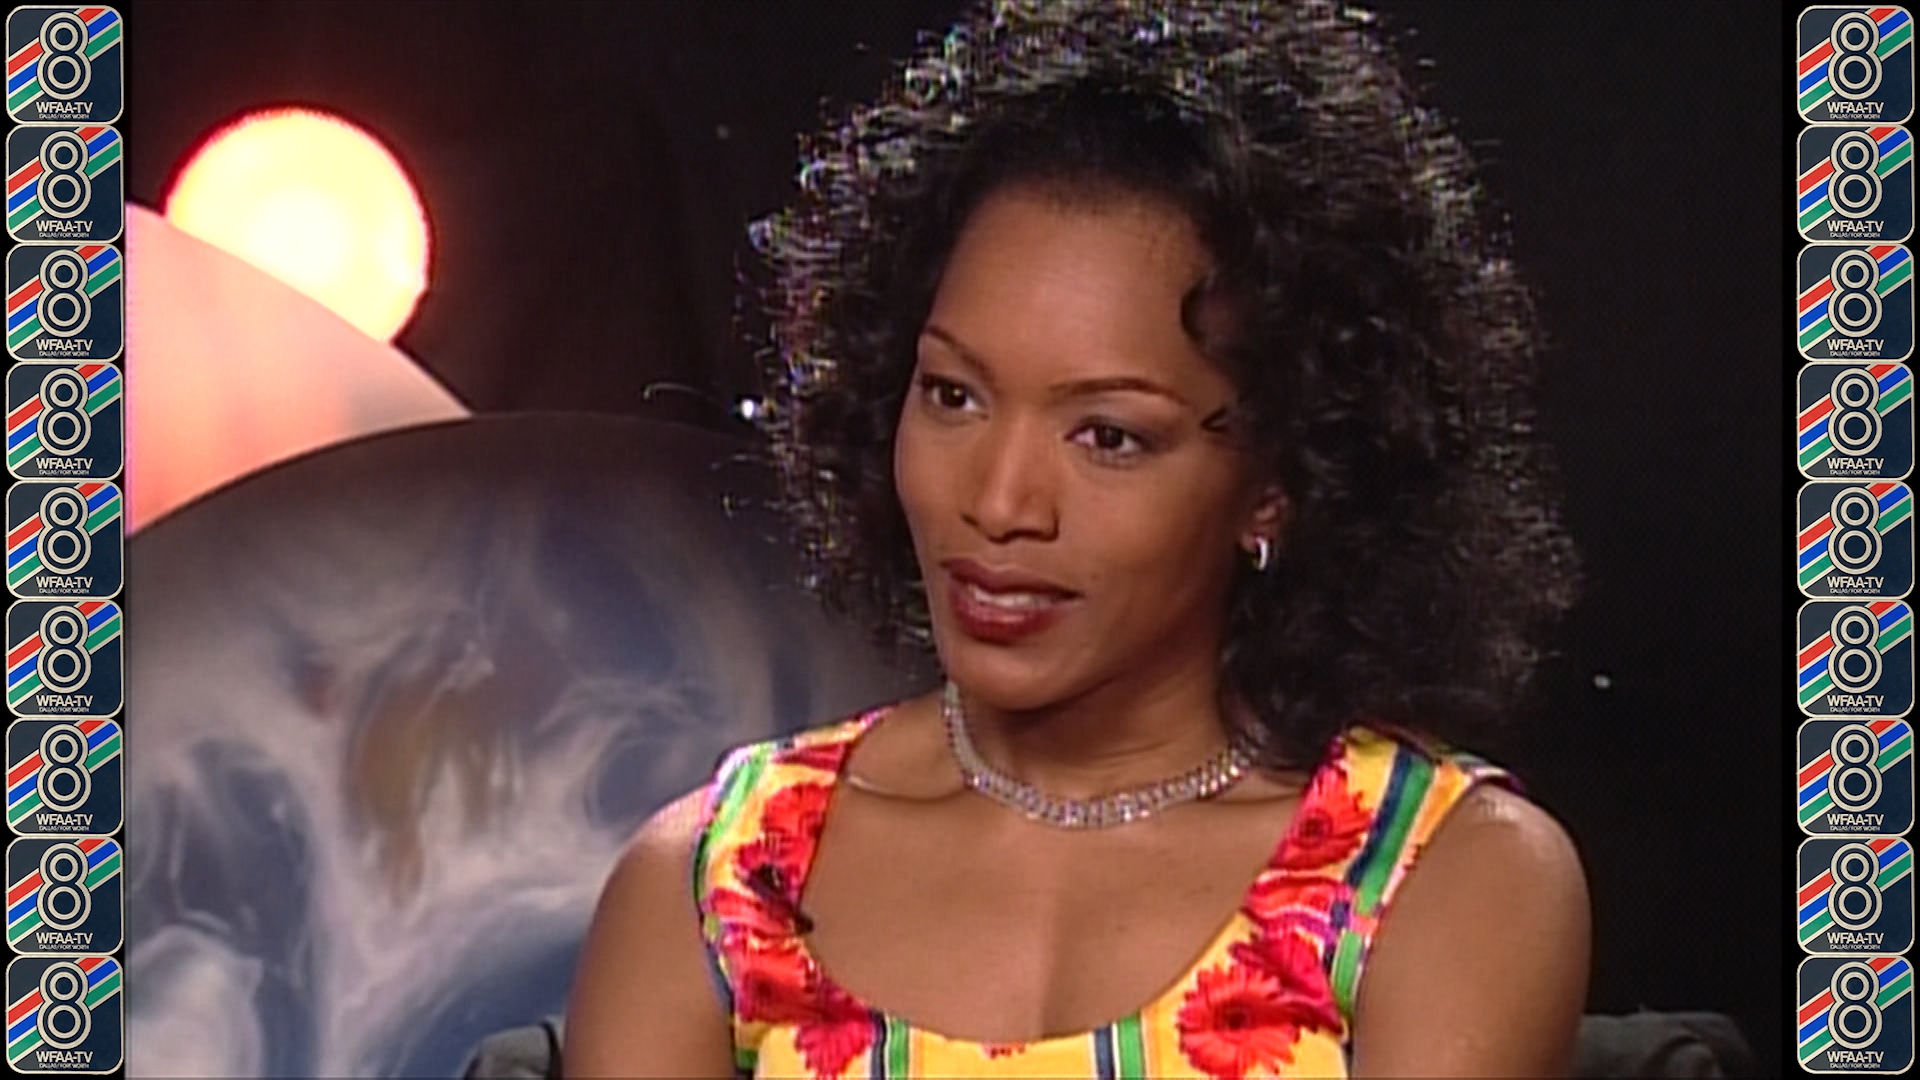 Angela Bassett sat down with WFAA to talk about taking on the role of Rachel Constantine in the 1997 film Contact.